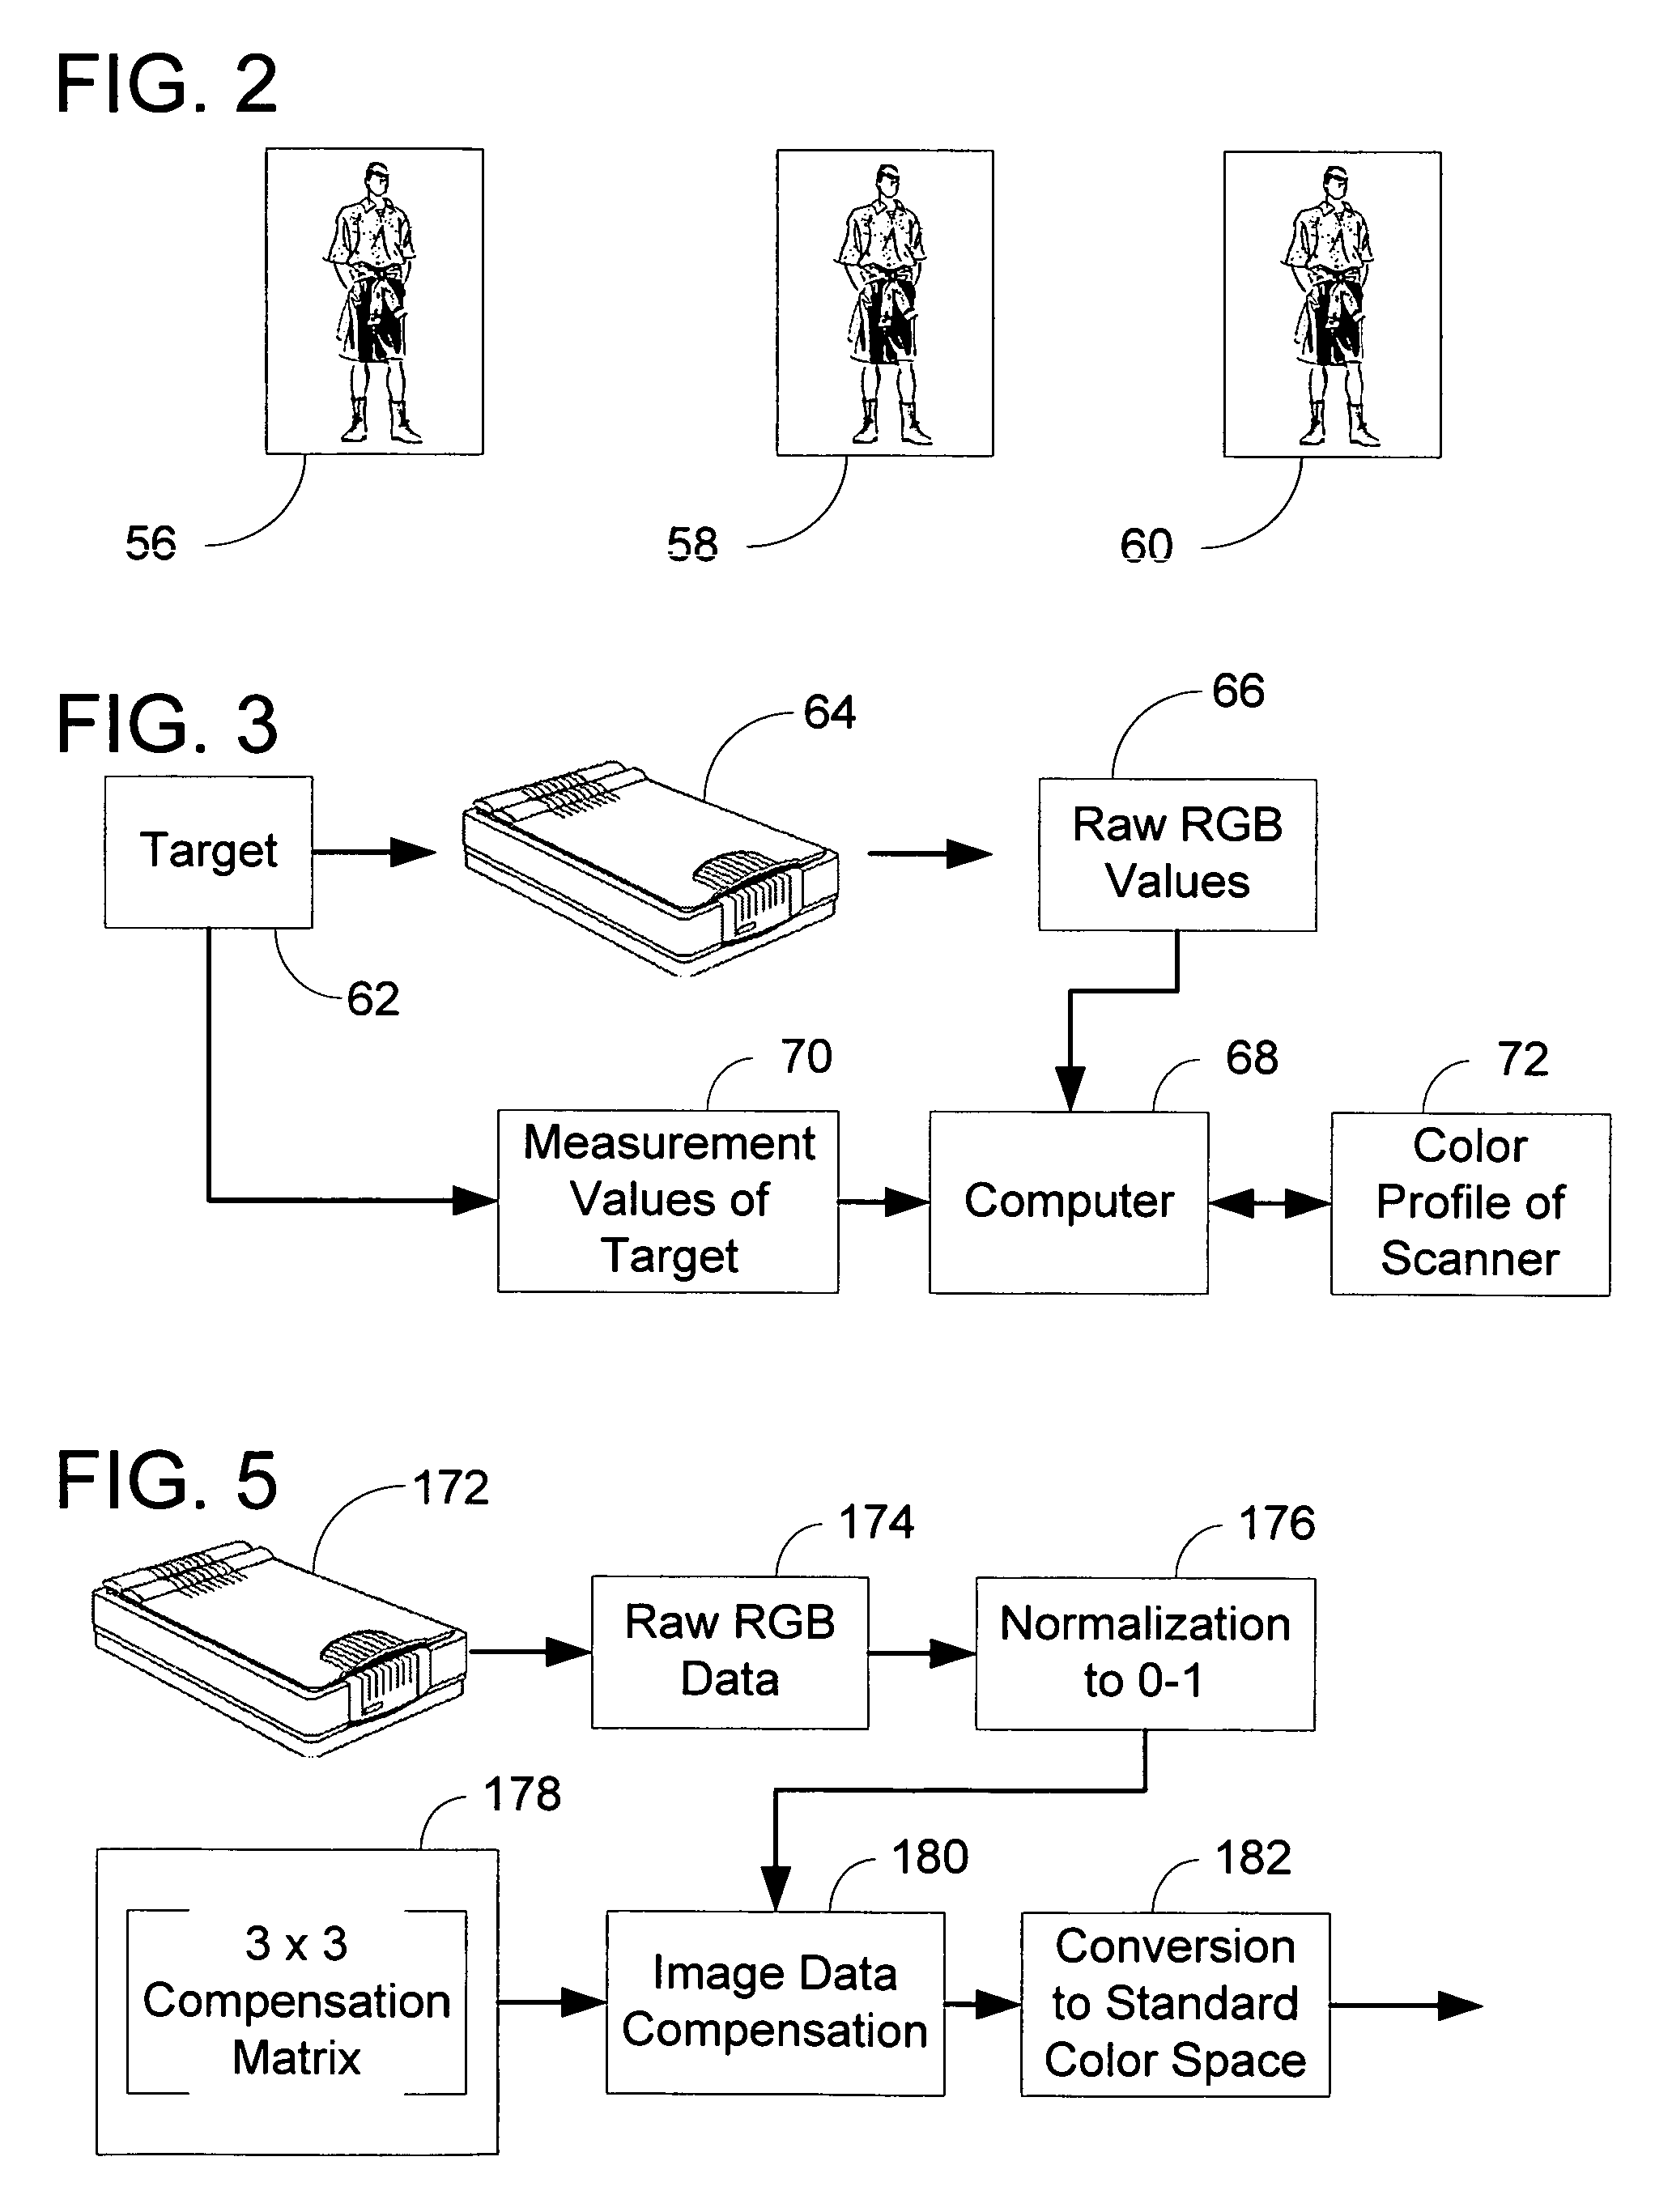 Method of achieving high color fidelity in a digital image capture device and a capture device incorporating same